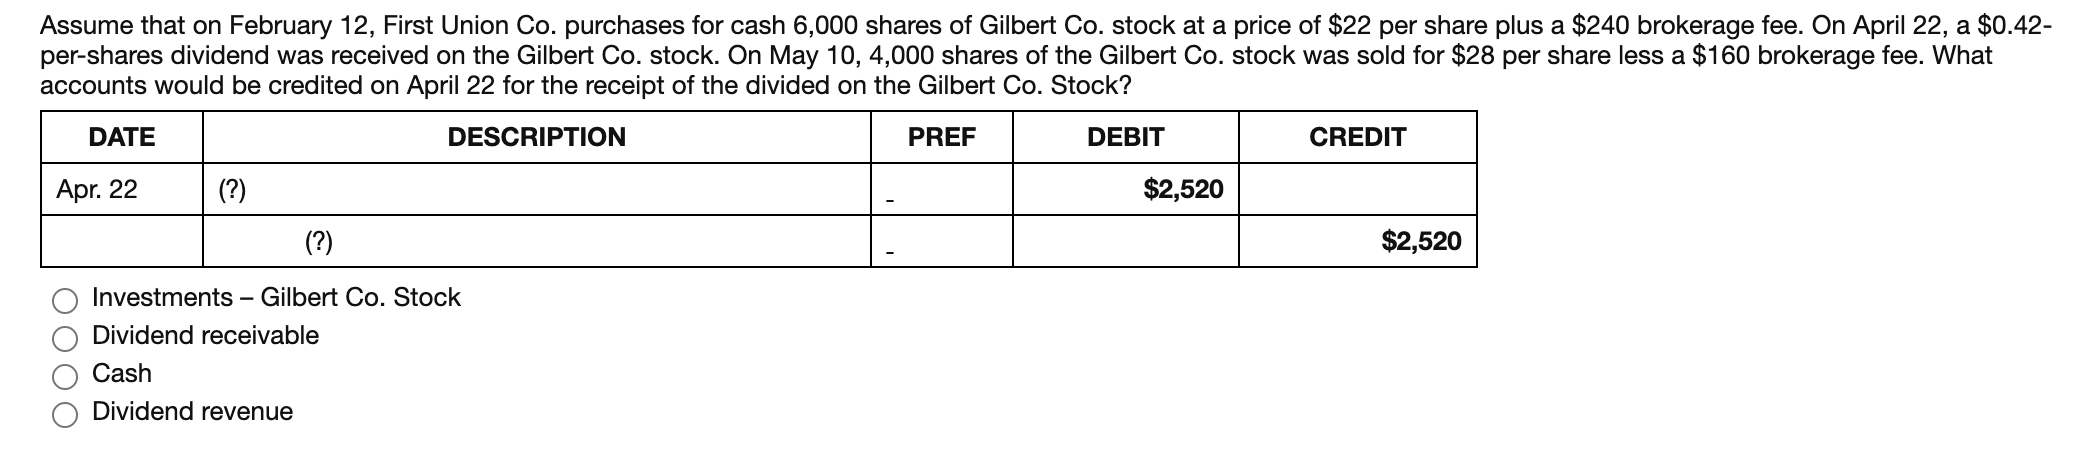 Assume that on February 12, First Union Co. purchases for cash 6,000 shares of Gilbert Co. stock at a price of $22 per share plus a $240 brokerage fee. On April 22, a $0.42-
per-shares dividend was received on the Gilbert Co. stock. On May 10, 4,000 shares of the Gilbert Co. stock was sold for $28 per share less a $160 brokerage fee. What
accounts would be credited on April 22 for the receipt of the divided on the Gilbert Co. Stock?
DATE
DESCRIPTION
PREF
DEBIT
CREDIT
Apr. 22
(?)
$2,520
(?)
$2,520
Investments –
Gilbert Co. Stock
Dividend receivable
Cash
Dividend revenue
O000
